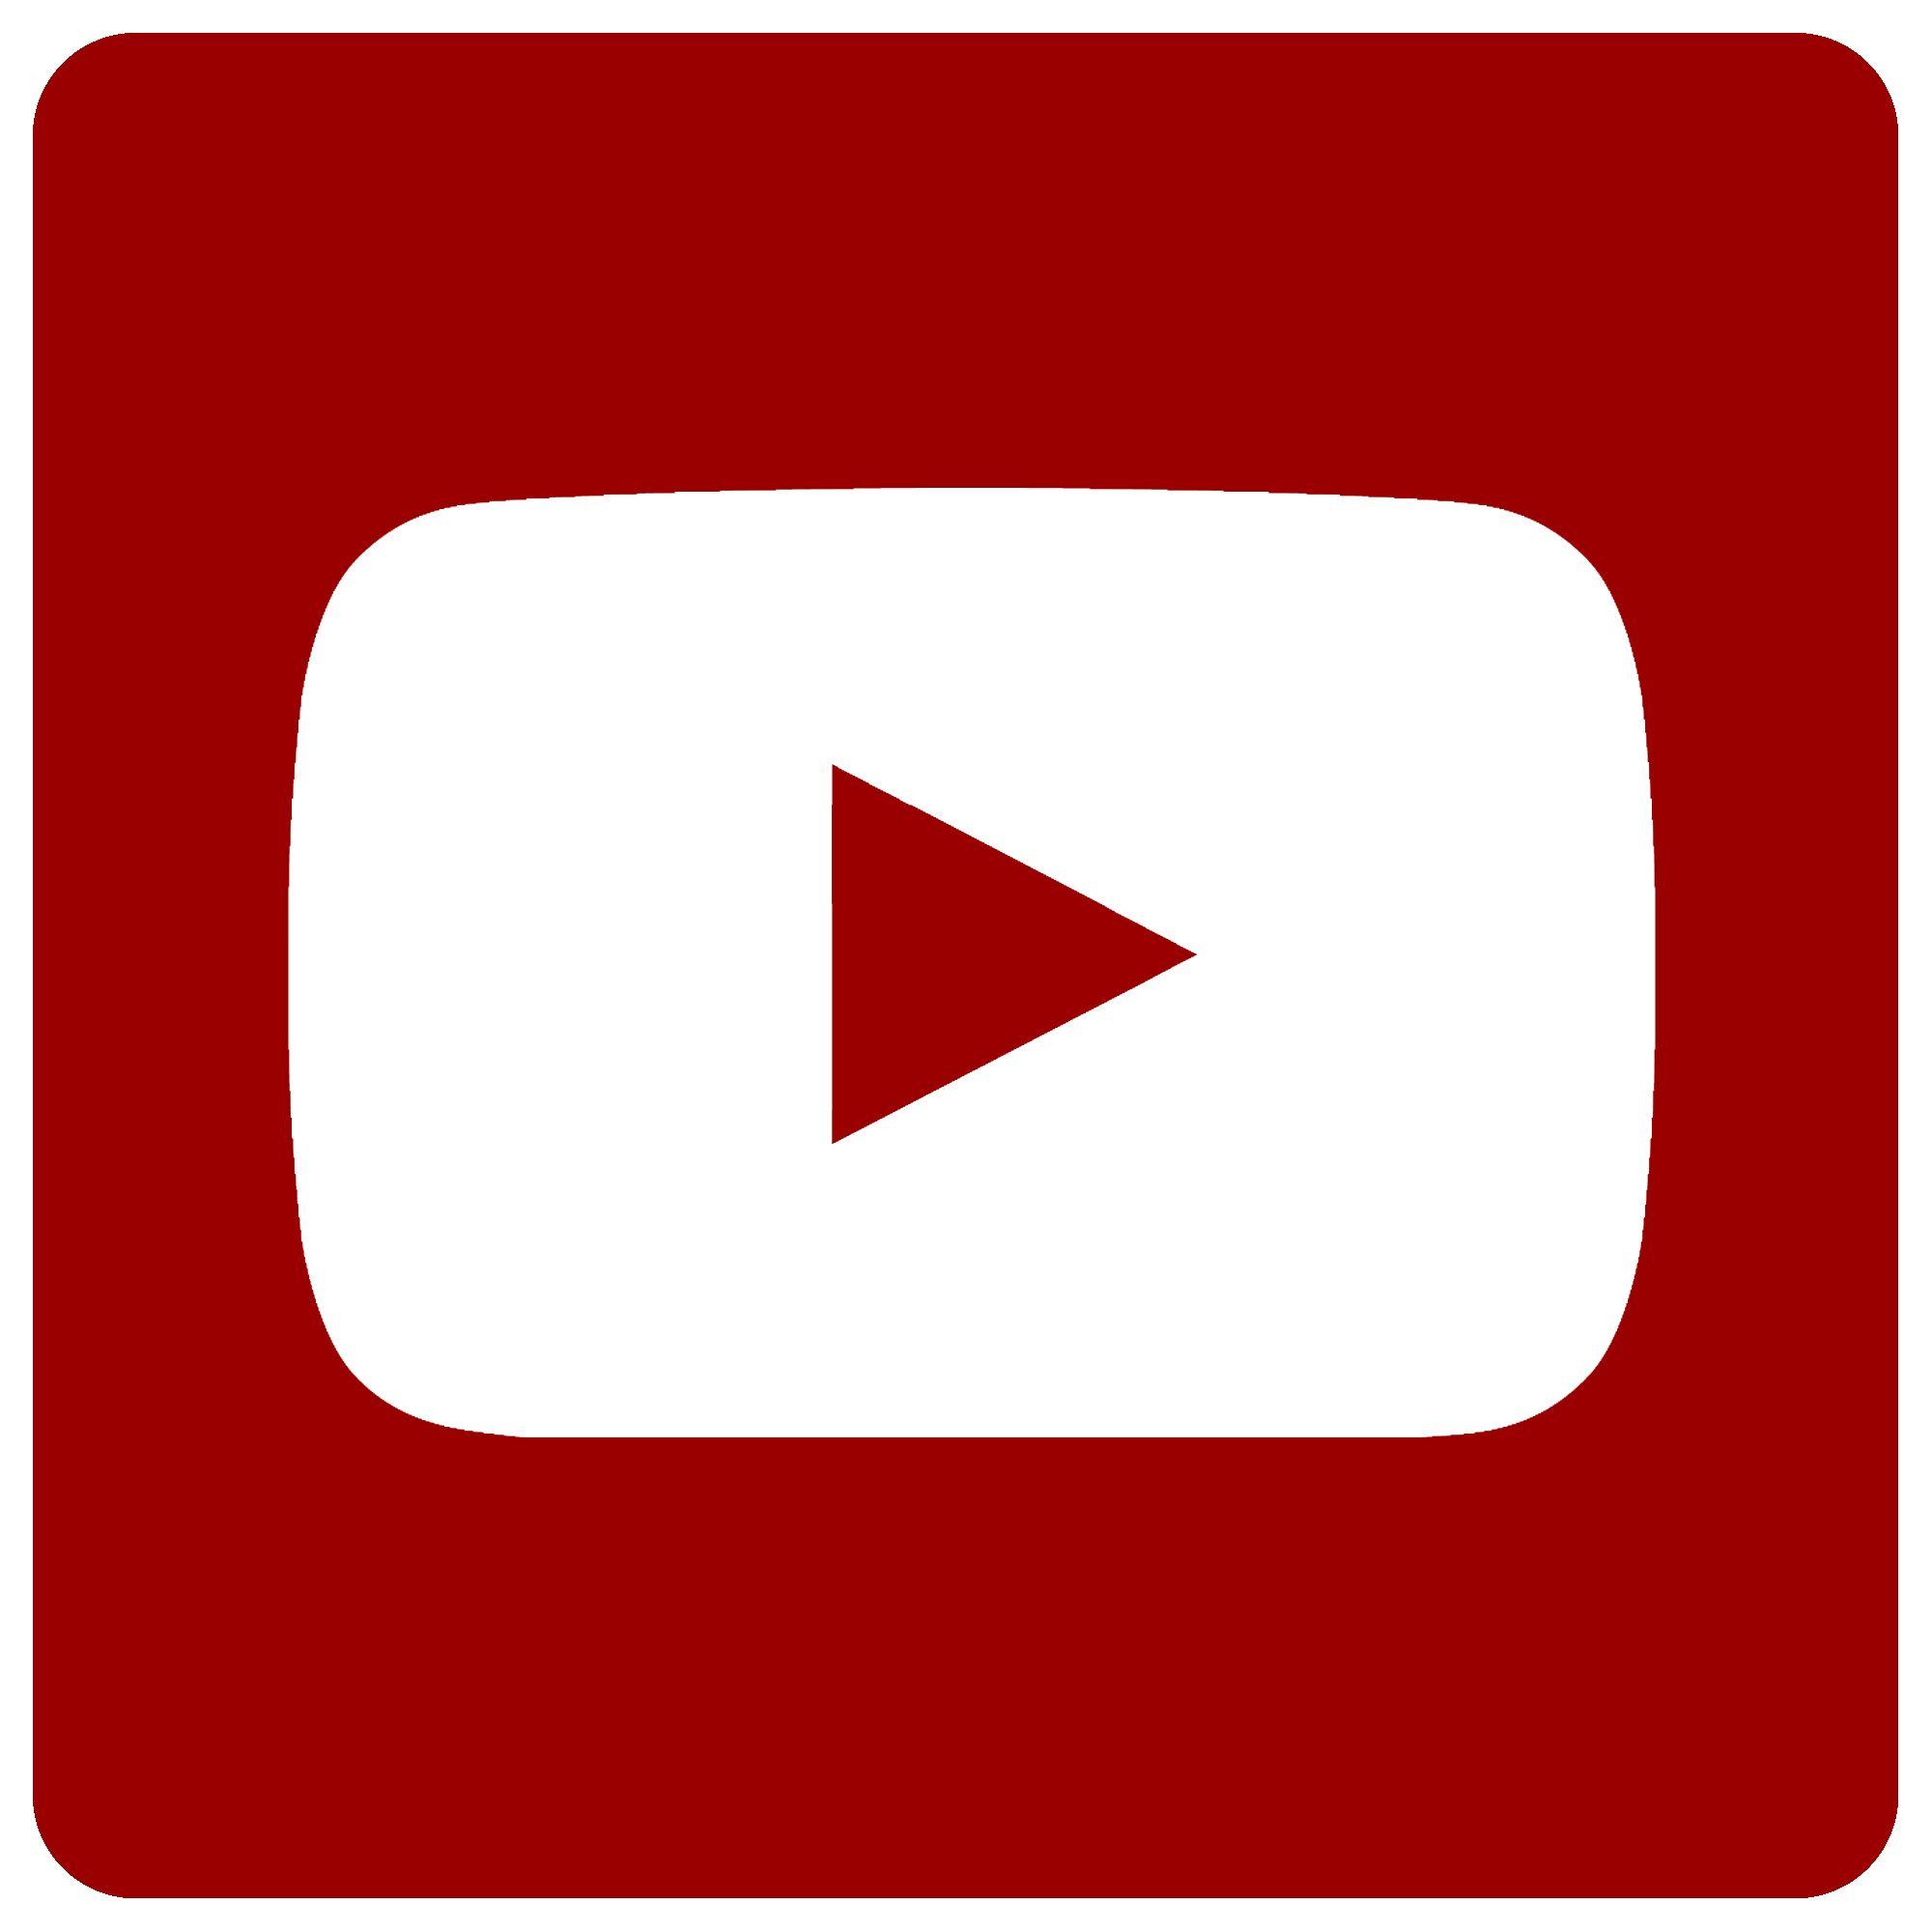 White with Red Shape Logo - YouTube Logo, YouTube Symbol, Meaning, History and Evolution